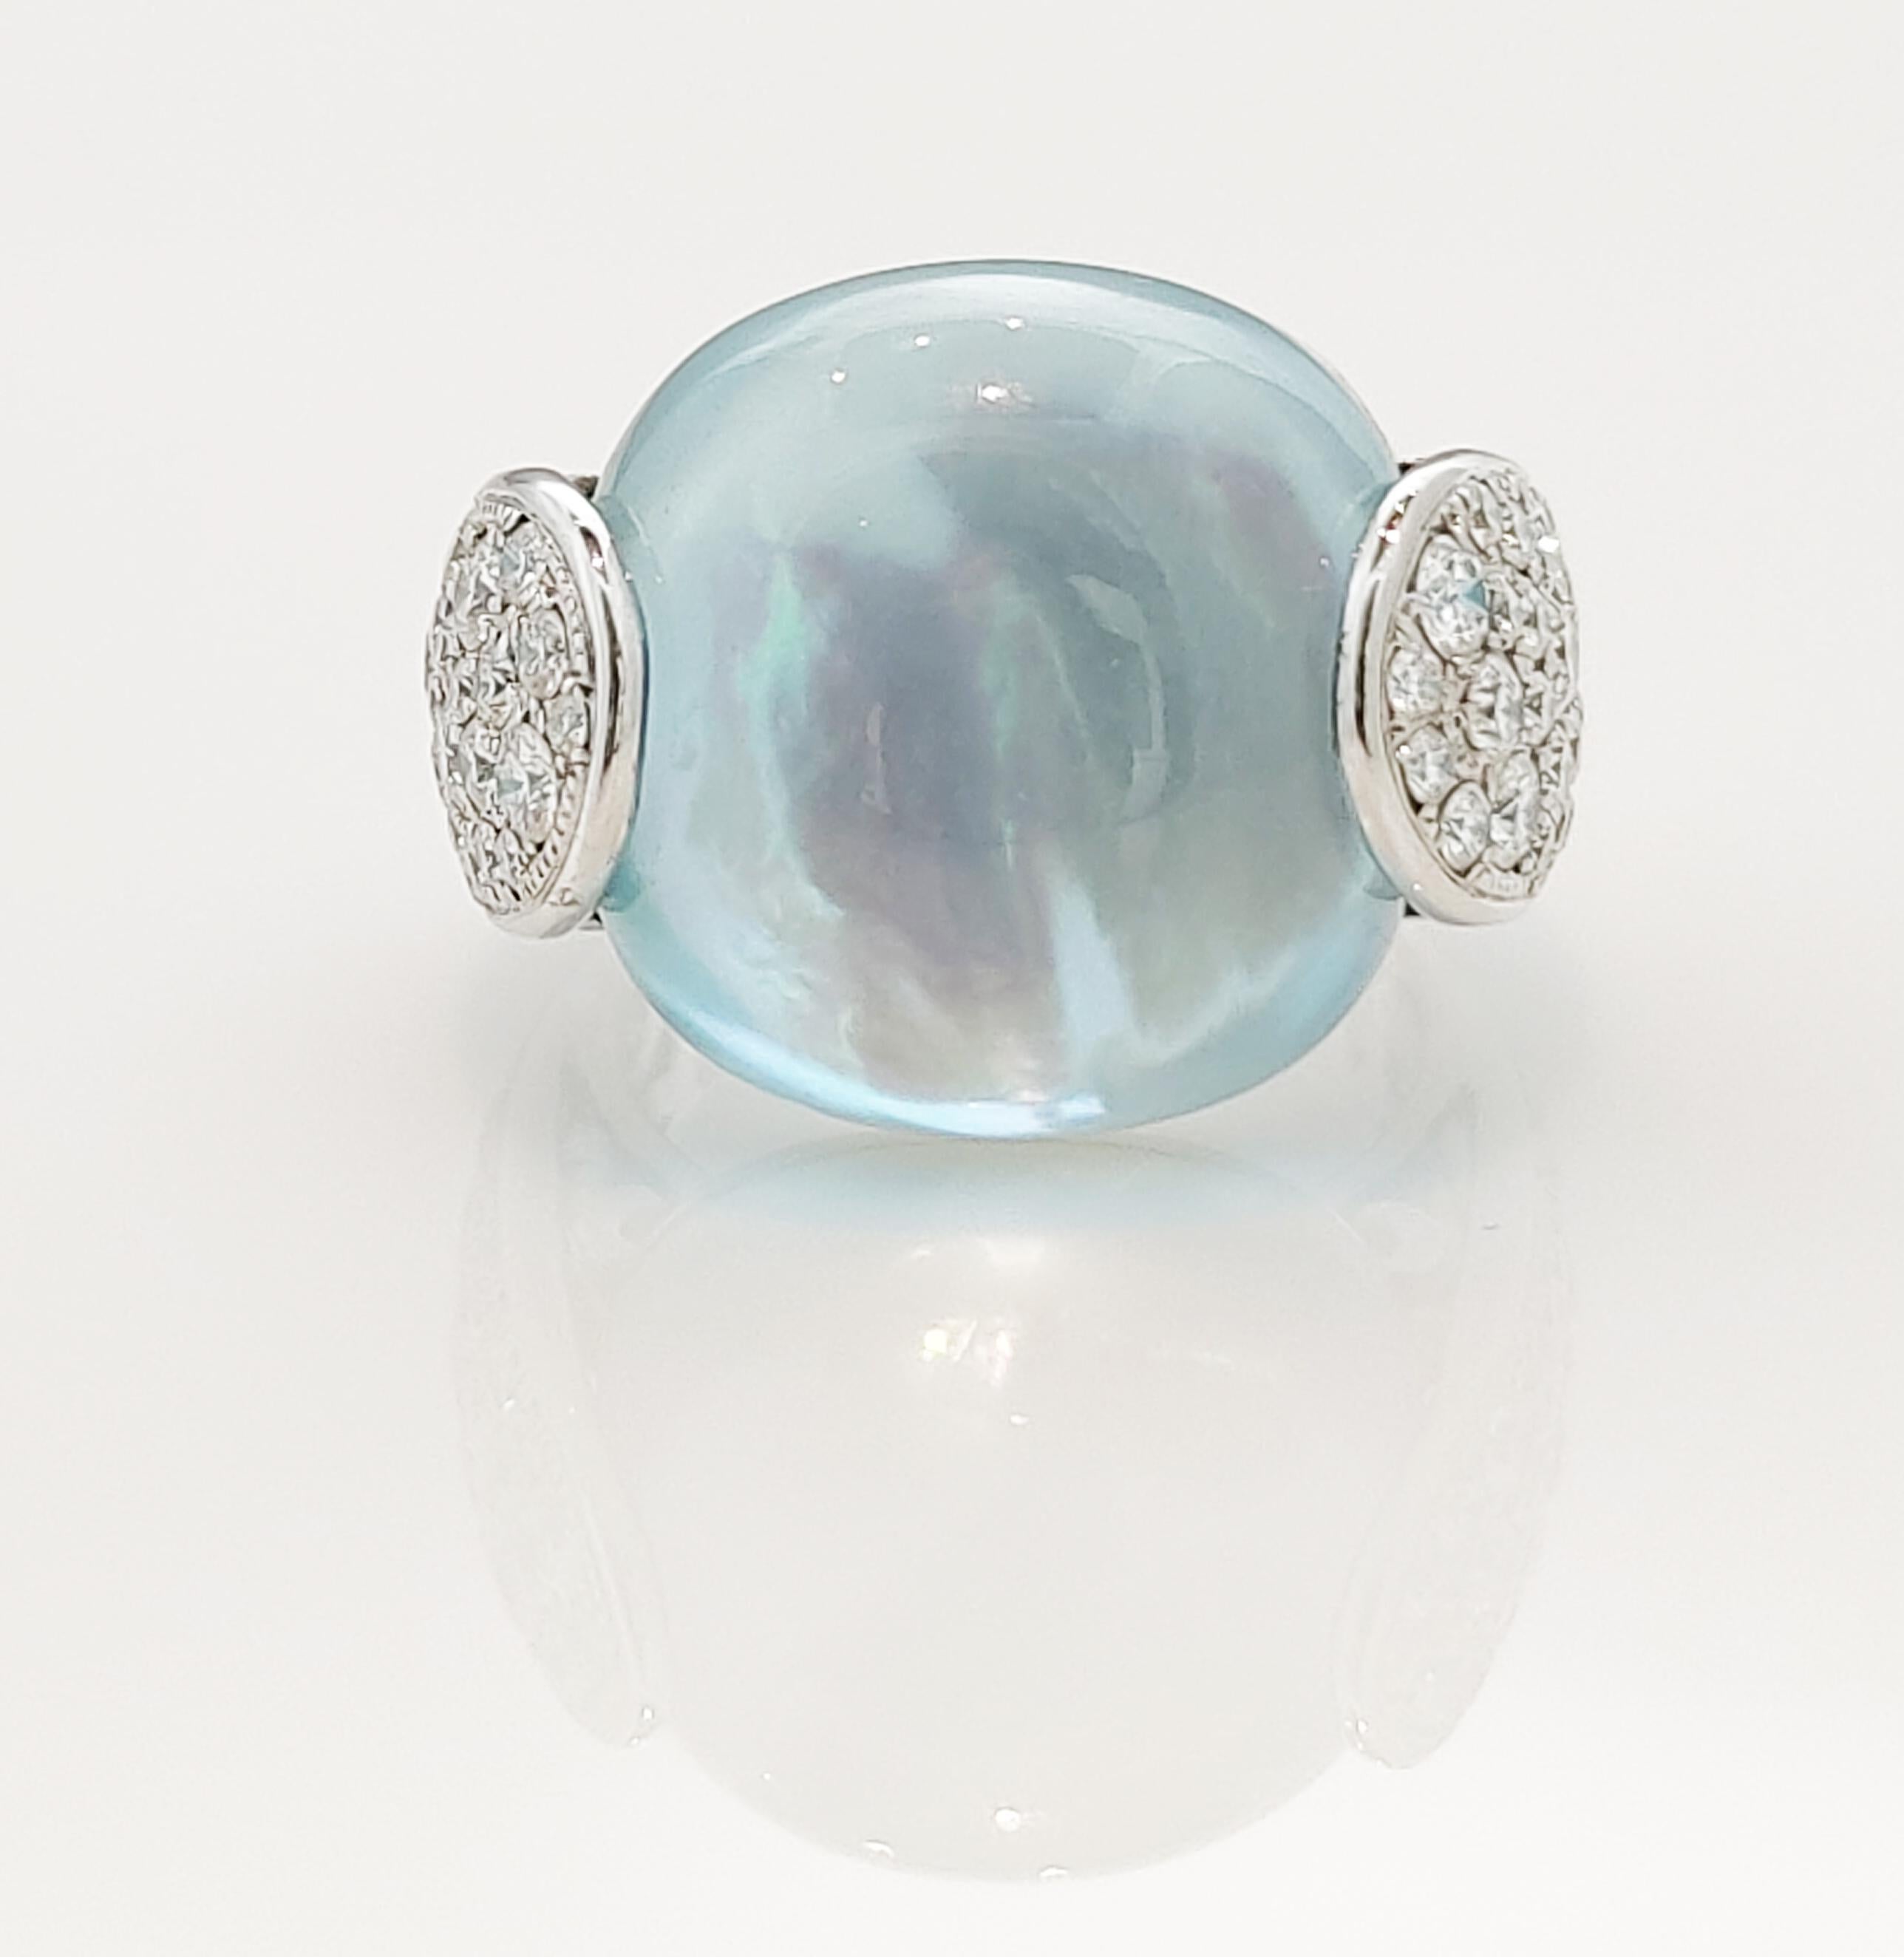 Ladies will love this blue topaz over mother of pearl doublet and diamond ring in 18K white gold. Set in the ring is a 30.23 carat cushion cut blue topaz over mother of pearl doublet and 73 round diamonds with a total weight of 1.76 carat.

The ring